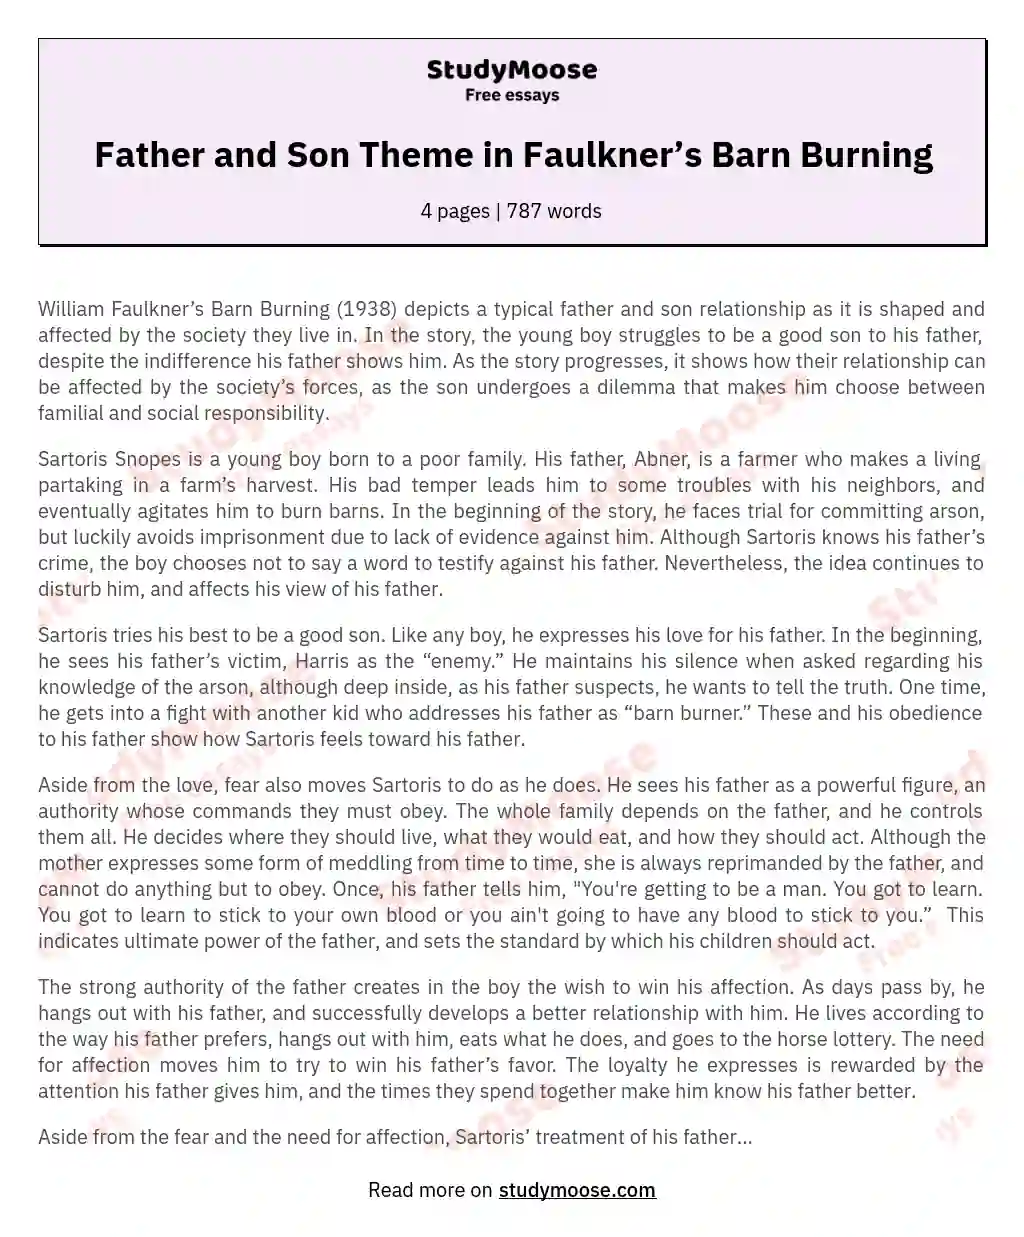 Father and Son Theme in Faulkner’s Barn Burning essay